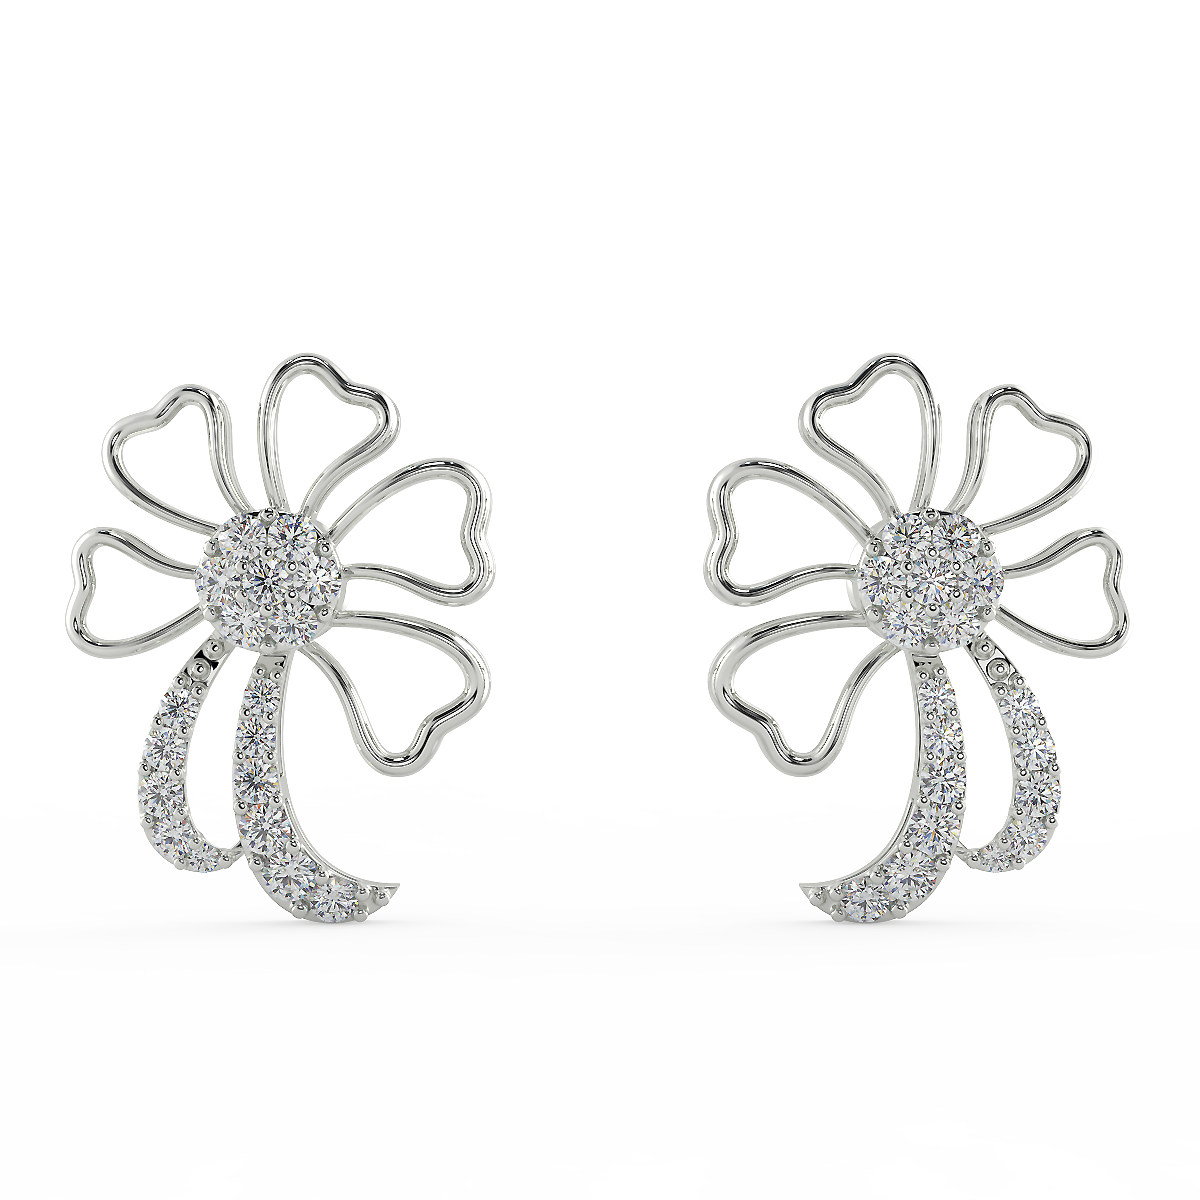 The Iris Set (925 Sterling Silver)